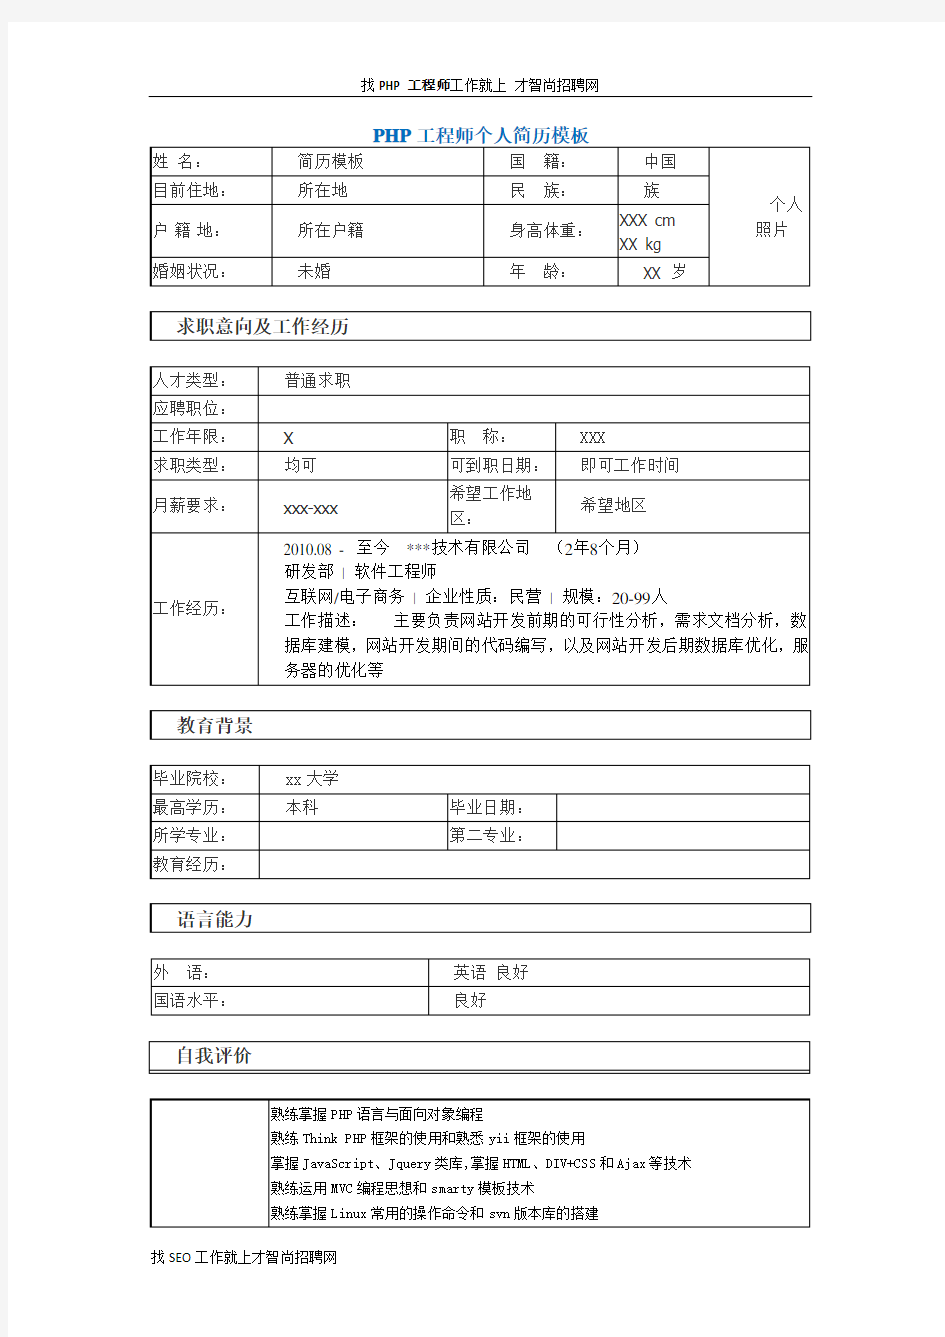 PHP工程师个人简历模板